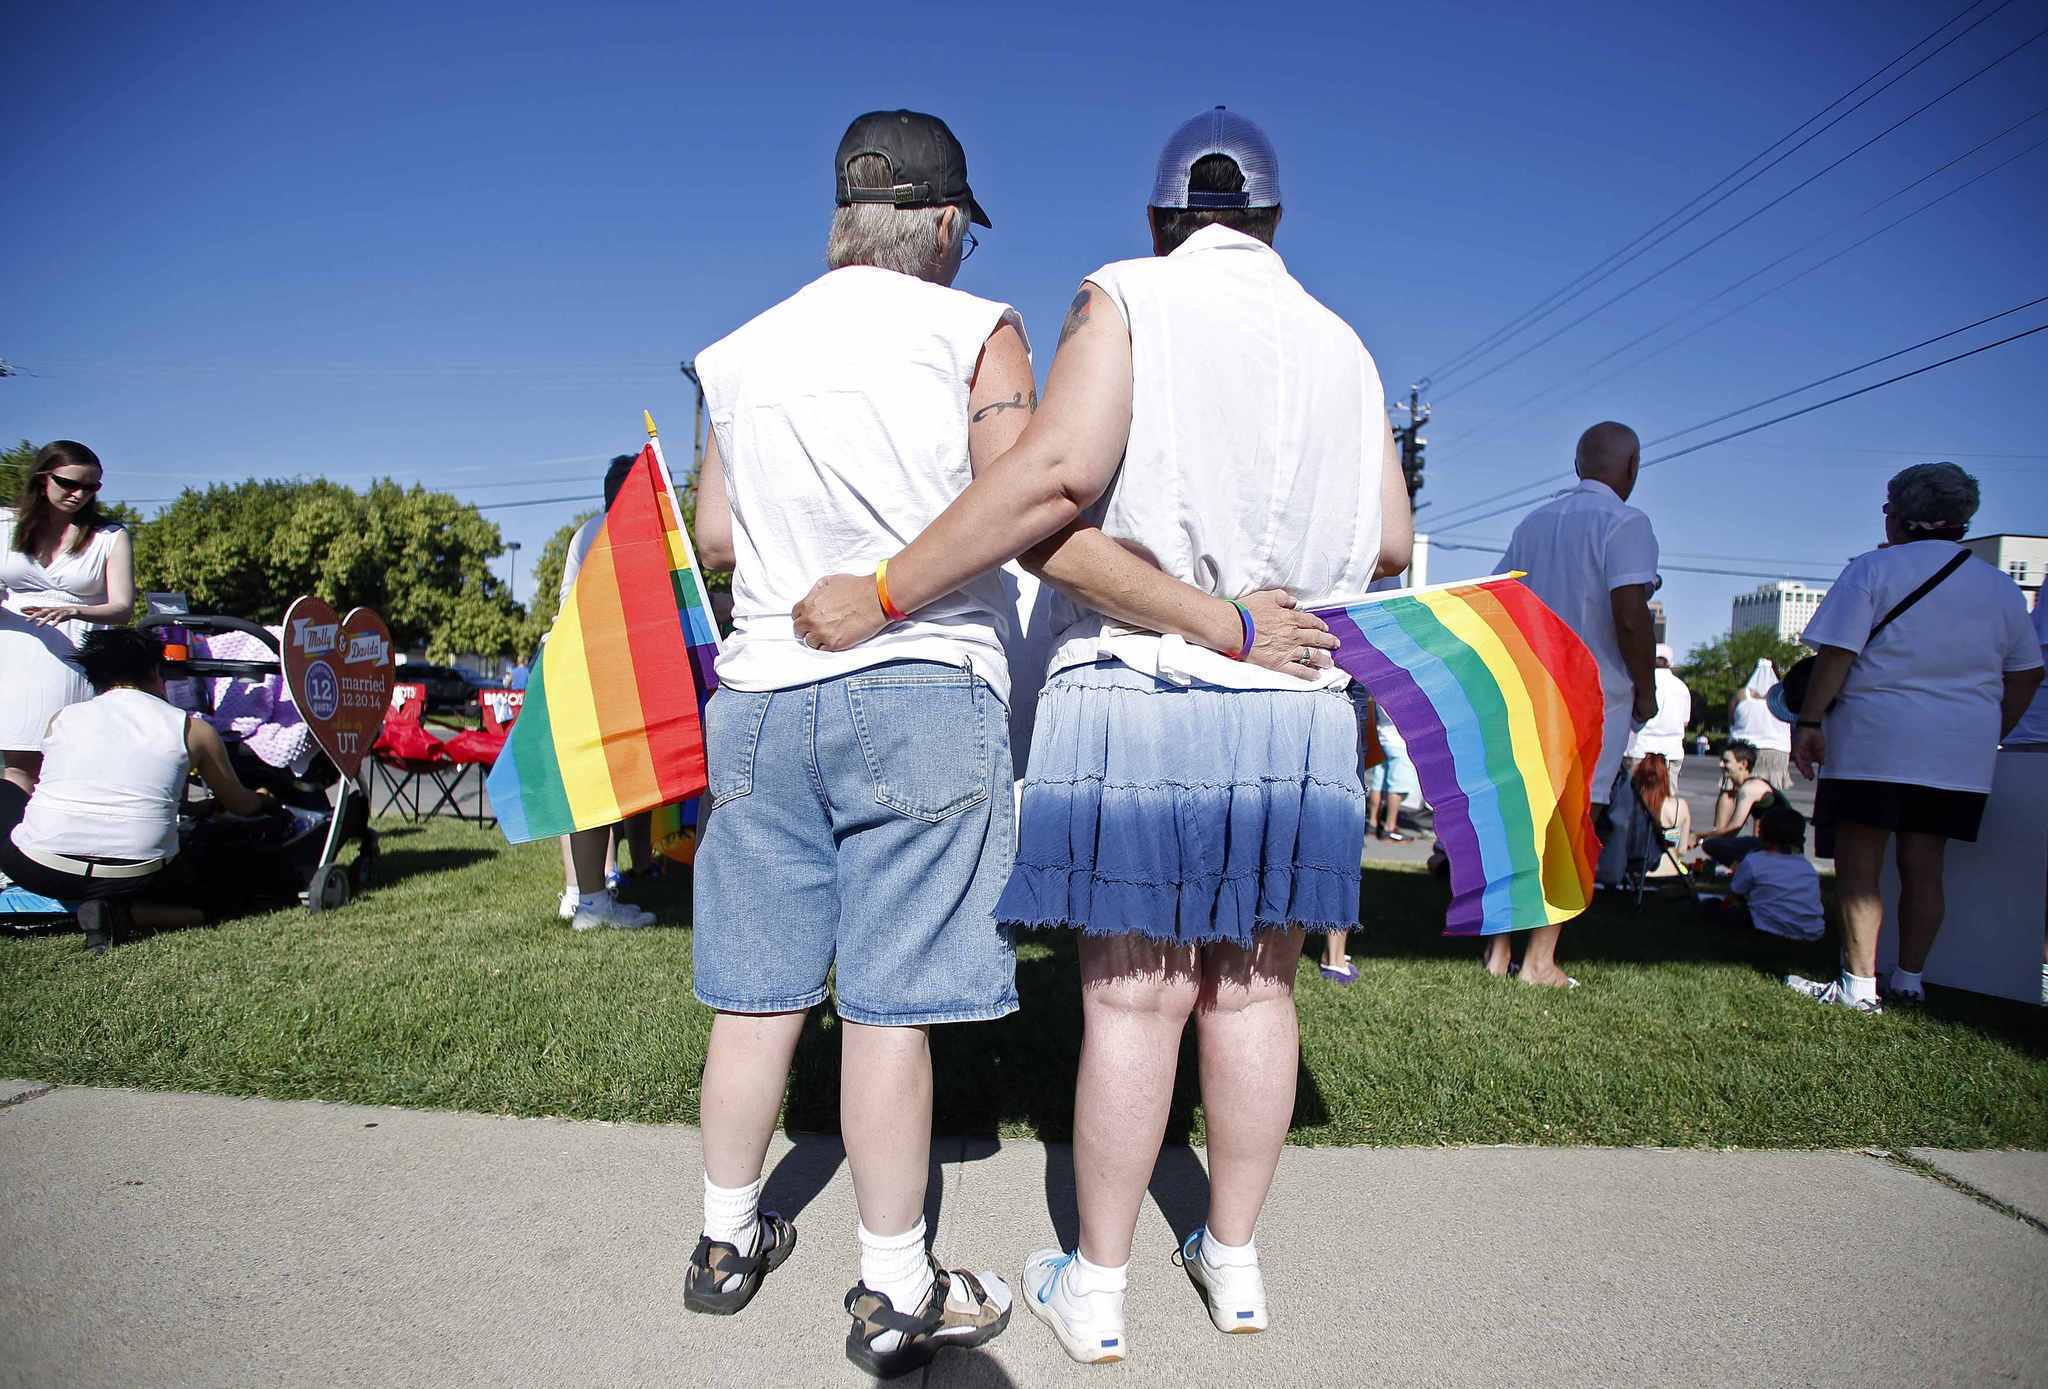 Court: Same-sex marriage bans in Indiana, Wisconsin unconstitutional